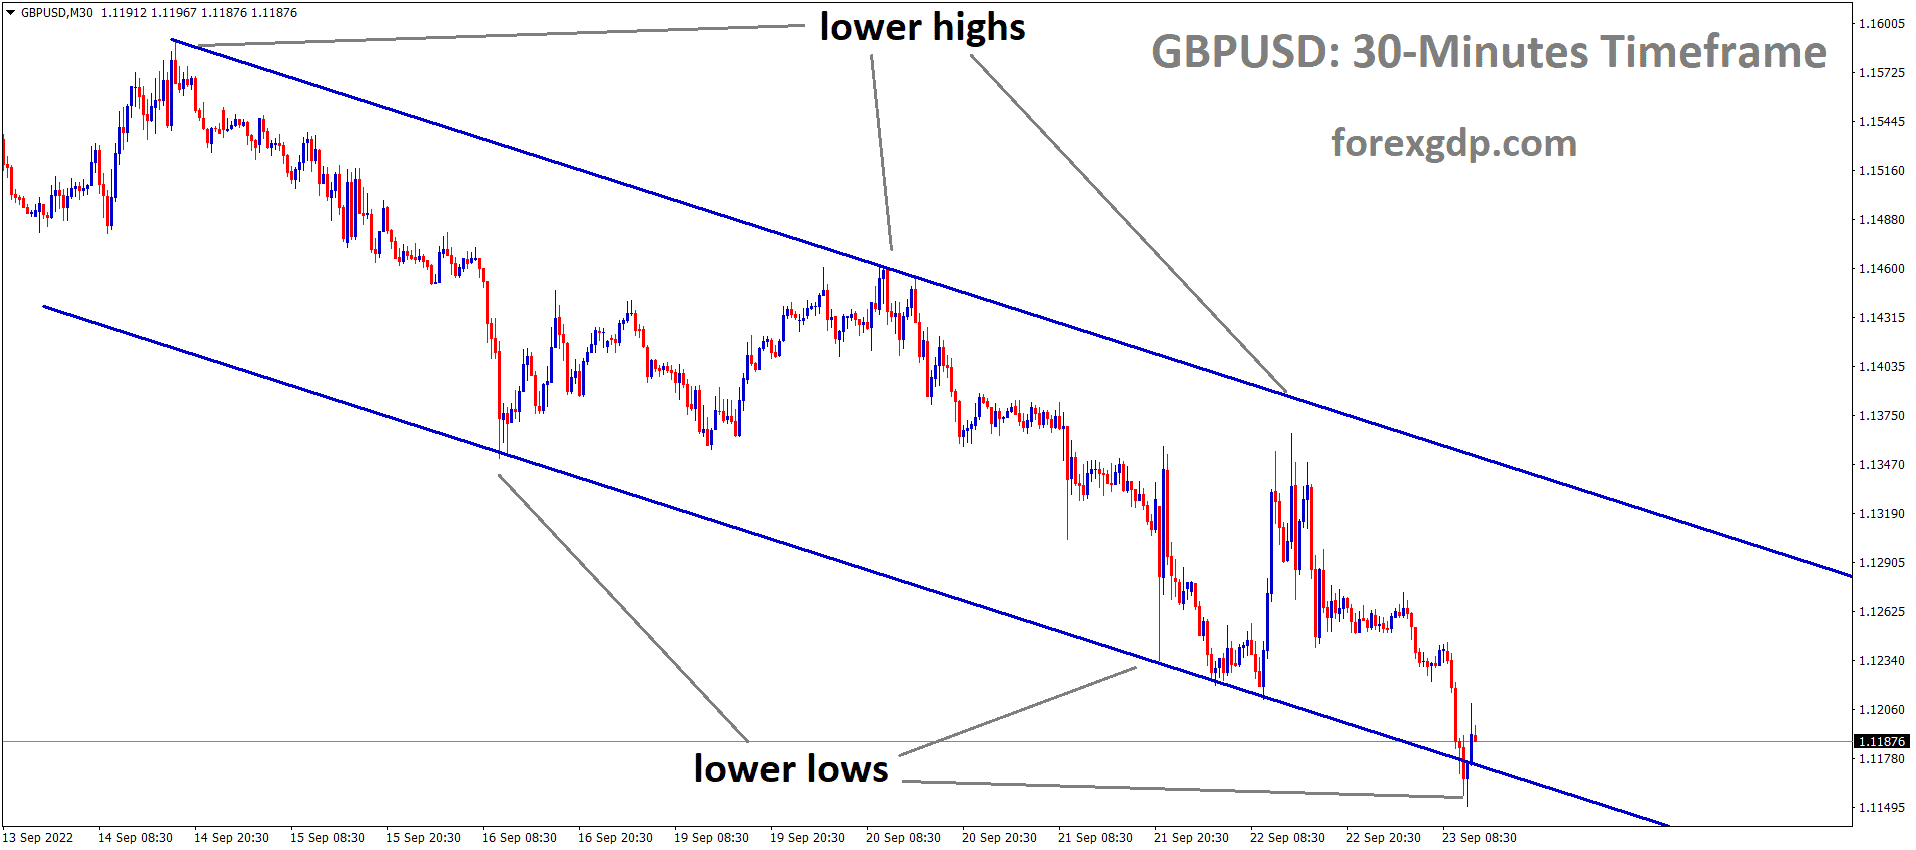 GBPUSD is moving in the Descending channel and the market has rebounded from the lower low area of the channel 1